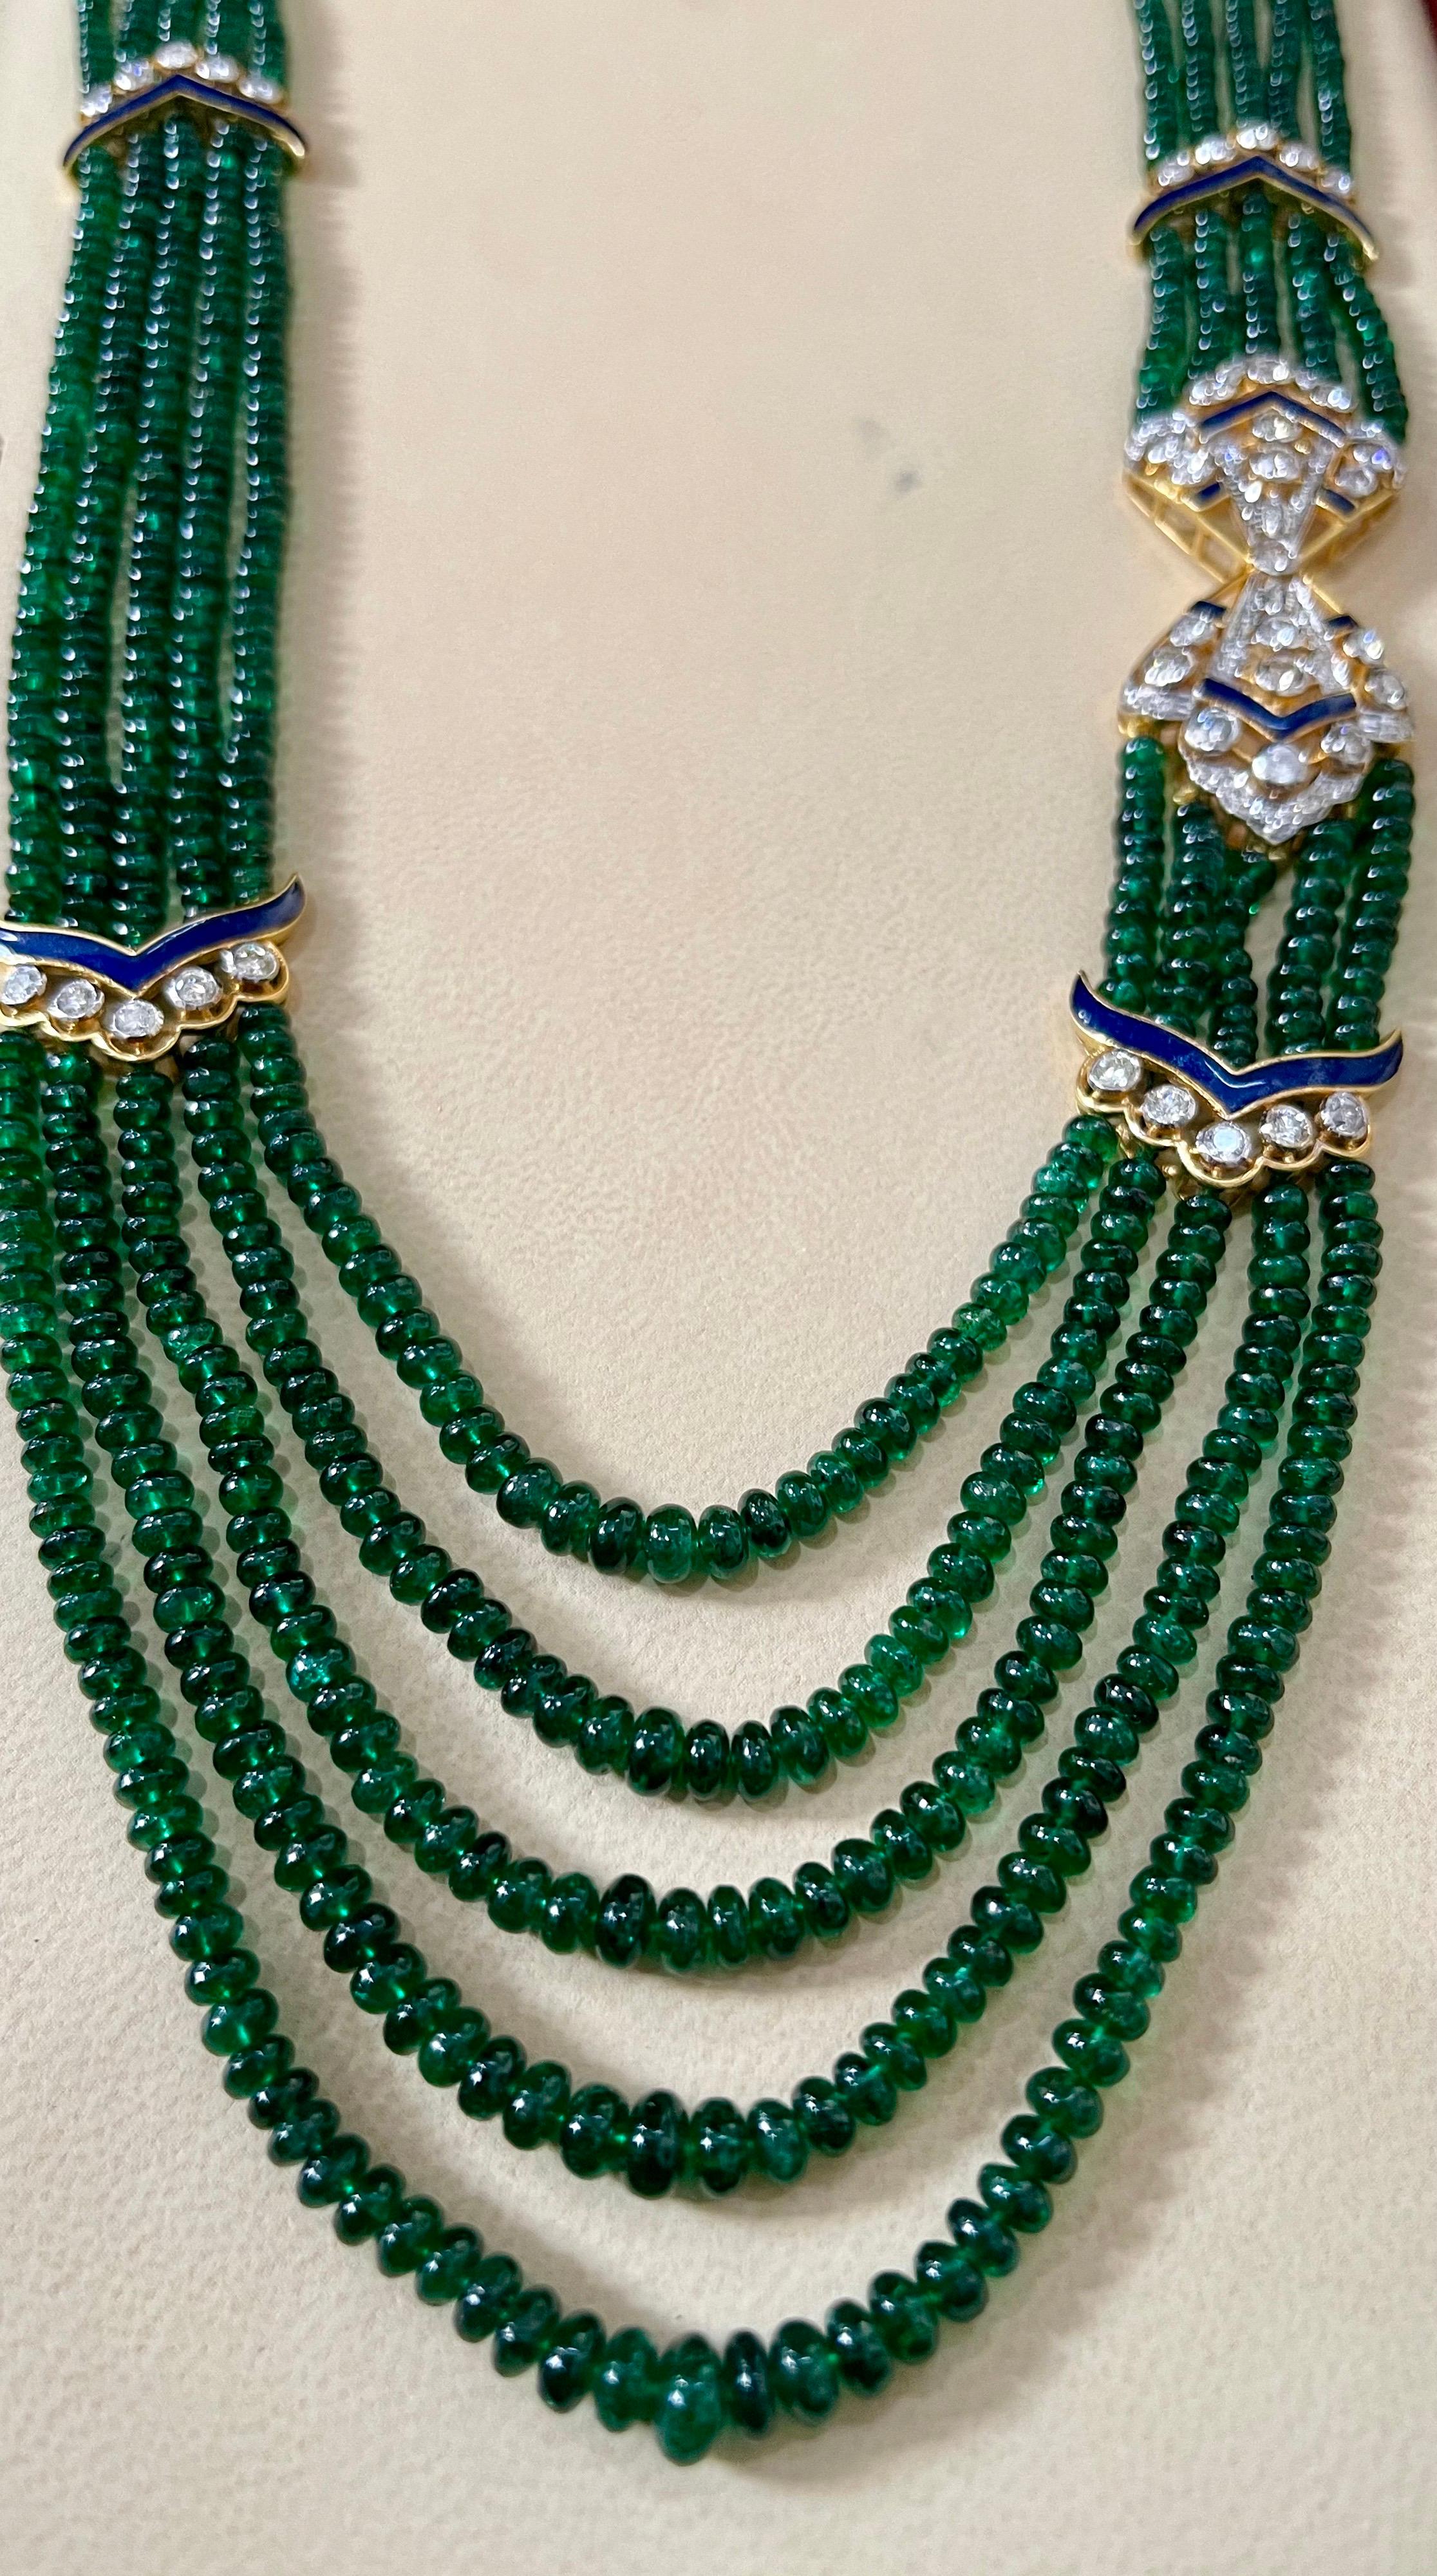 300 Carat 5-Strand Emerald Necklace with 4.8 Carat Diamond & Enamel in 14k Gold In Excellent Condition For Sale In New York, NY